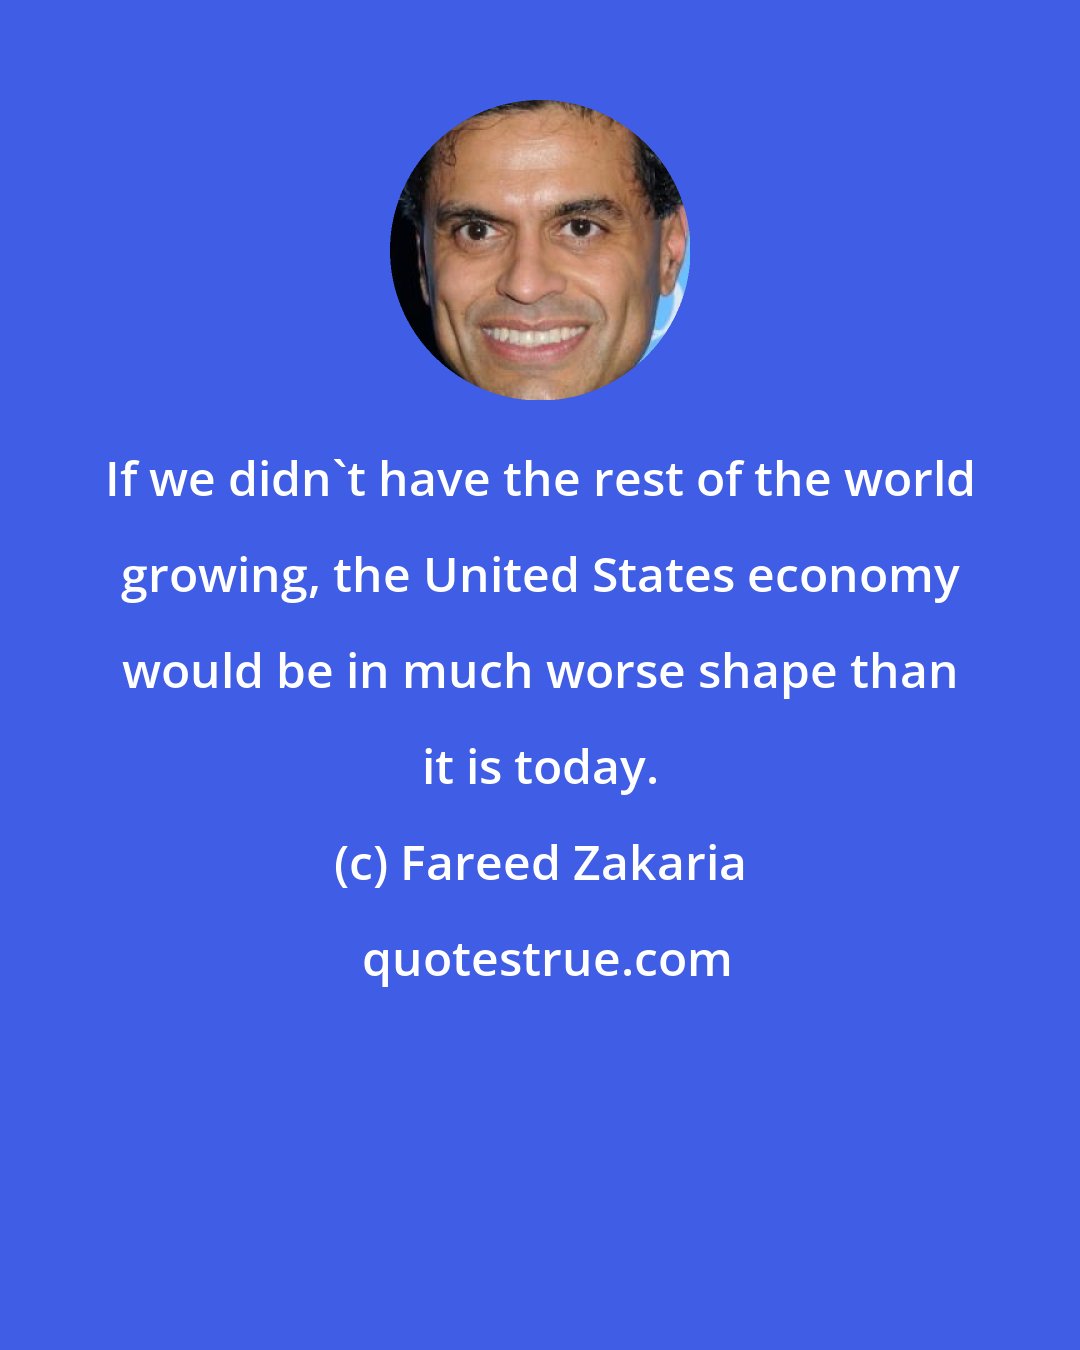 Fareed Zakaria: If we didn't have the rest of the world growing, the United States economy would be in much worse shape than it is today.